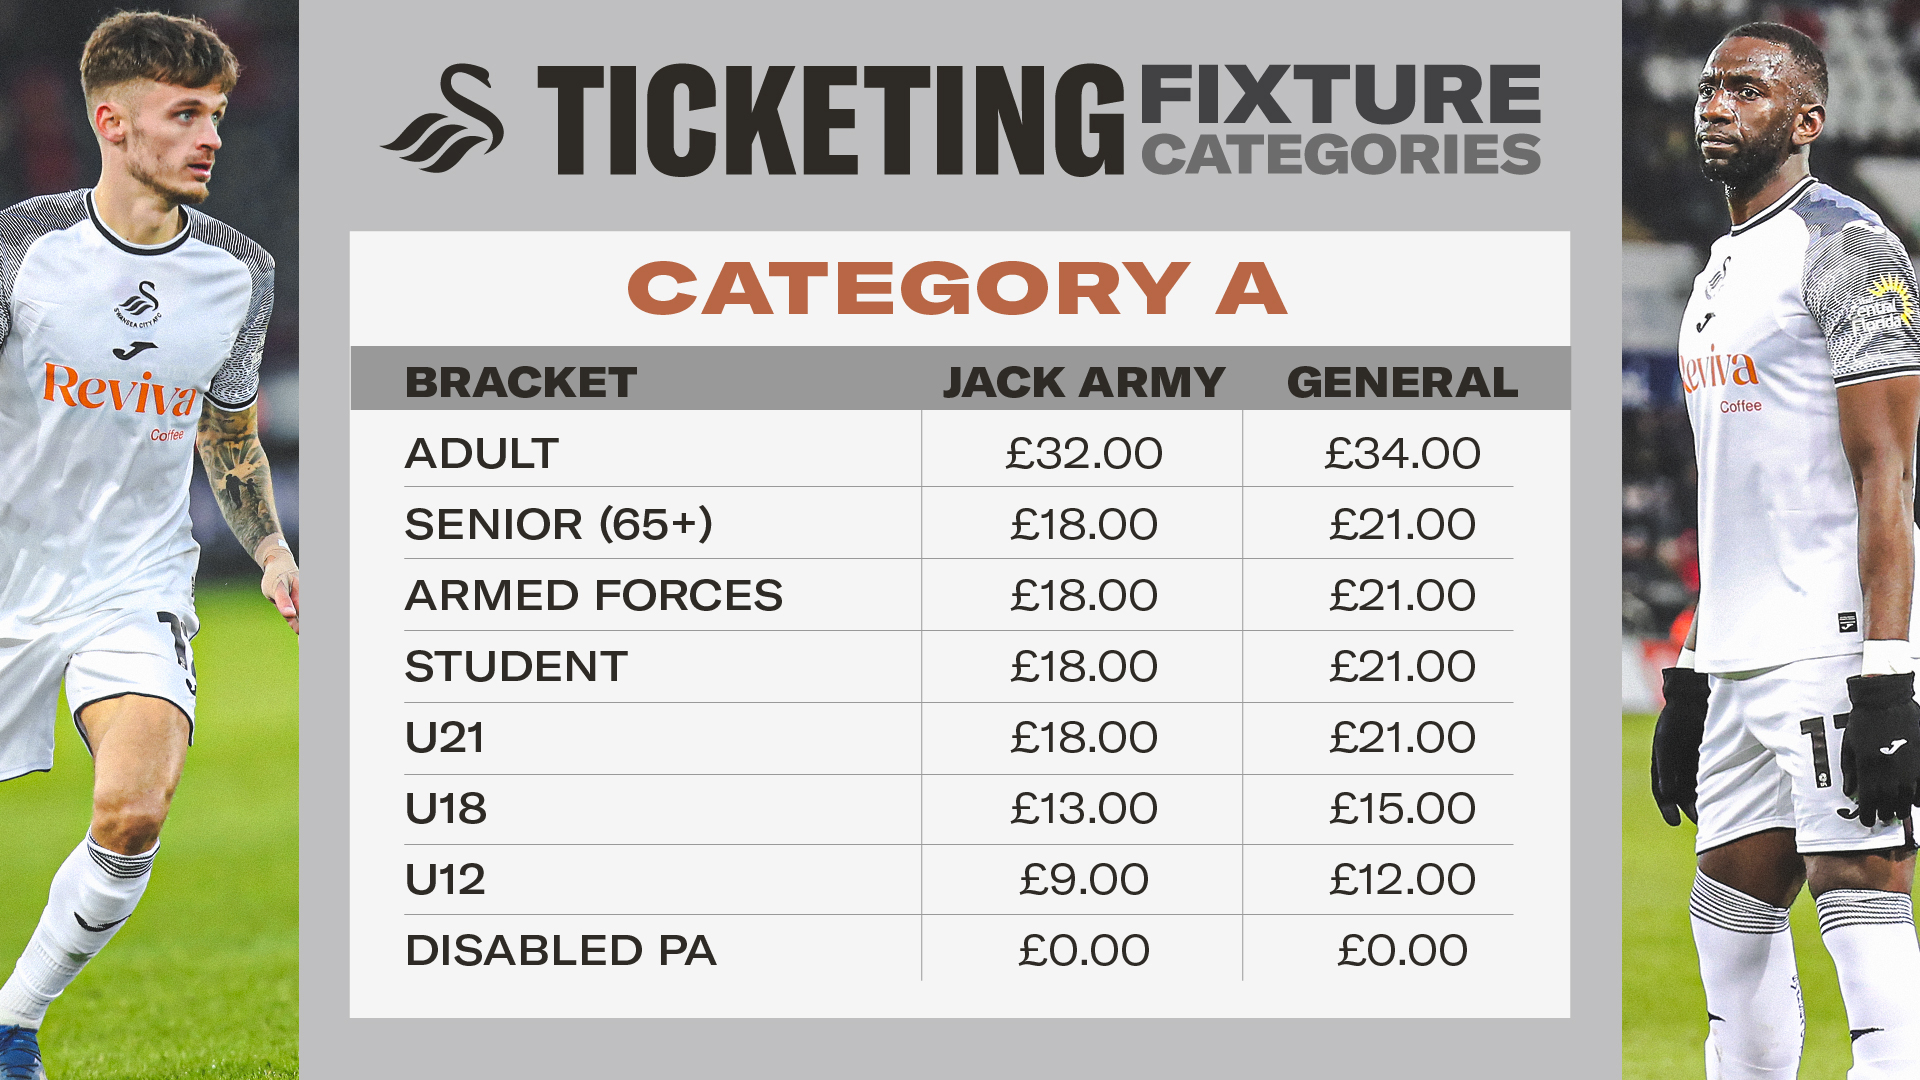 Category A ticketing